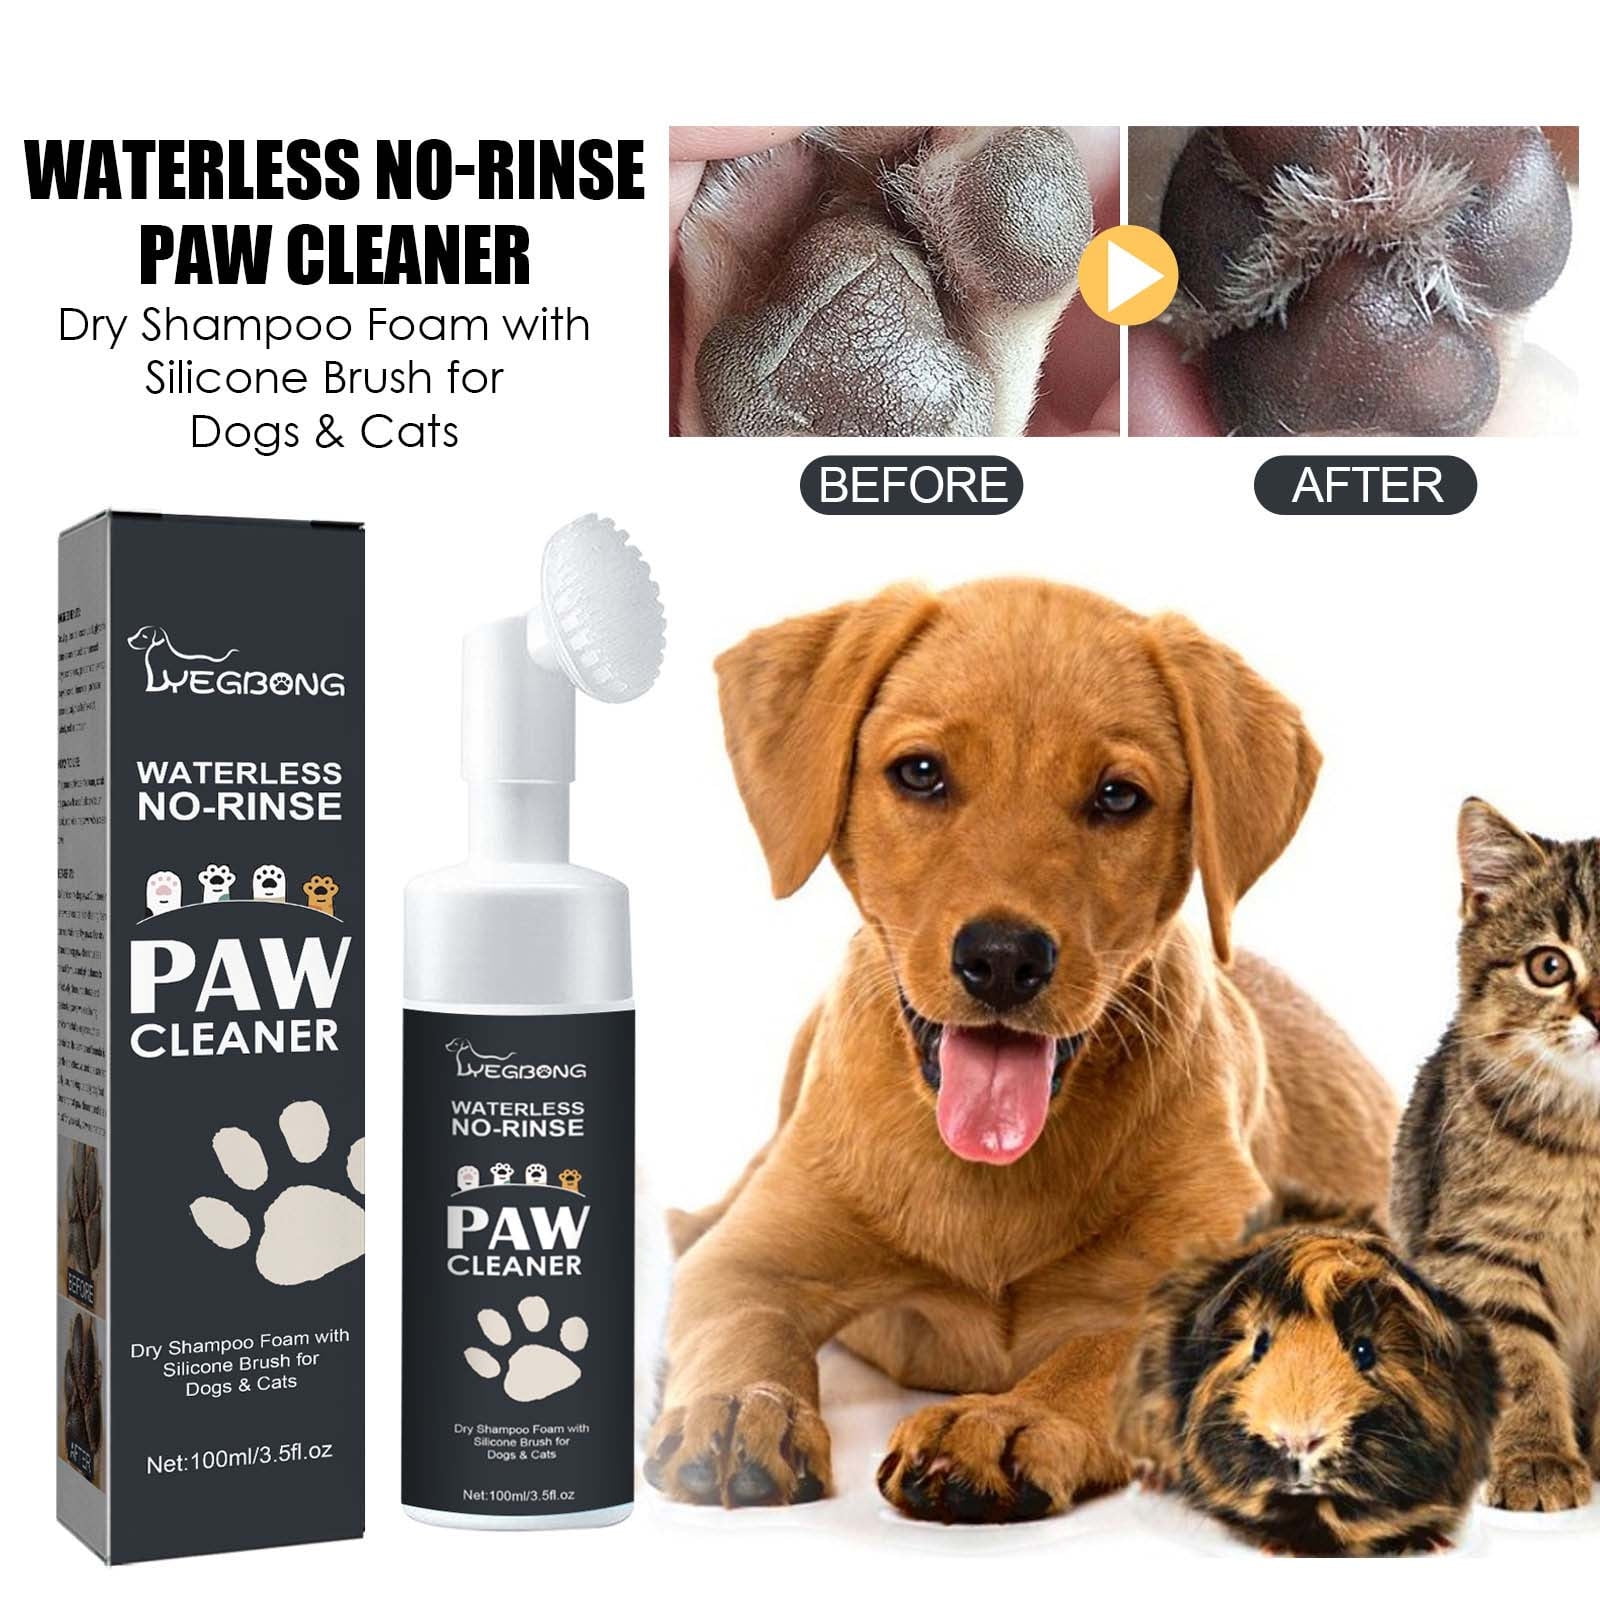 GENTLE CREATURES Magic Foam - Sulfate-Free, Waterless Shampoo Paw Cleaner  for Dogs, Cats, Pets - Dry Shampoo, Foot Cleaner Brush - with Orange, Odor